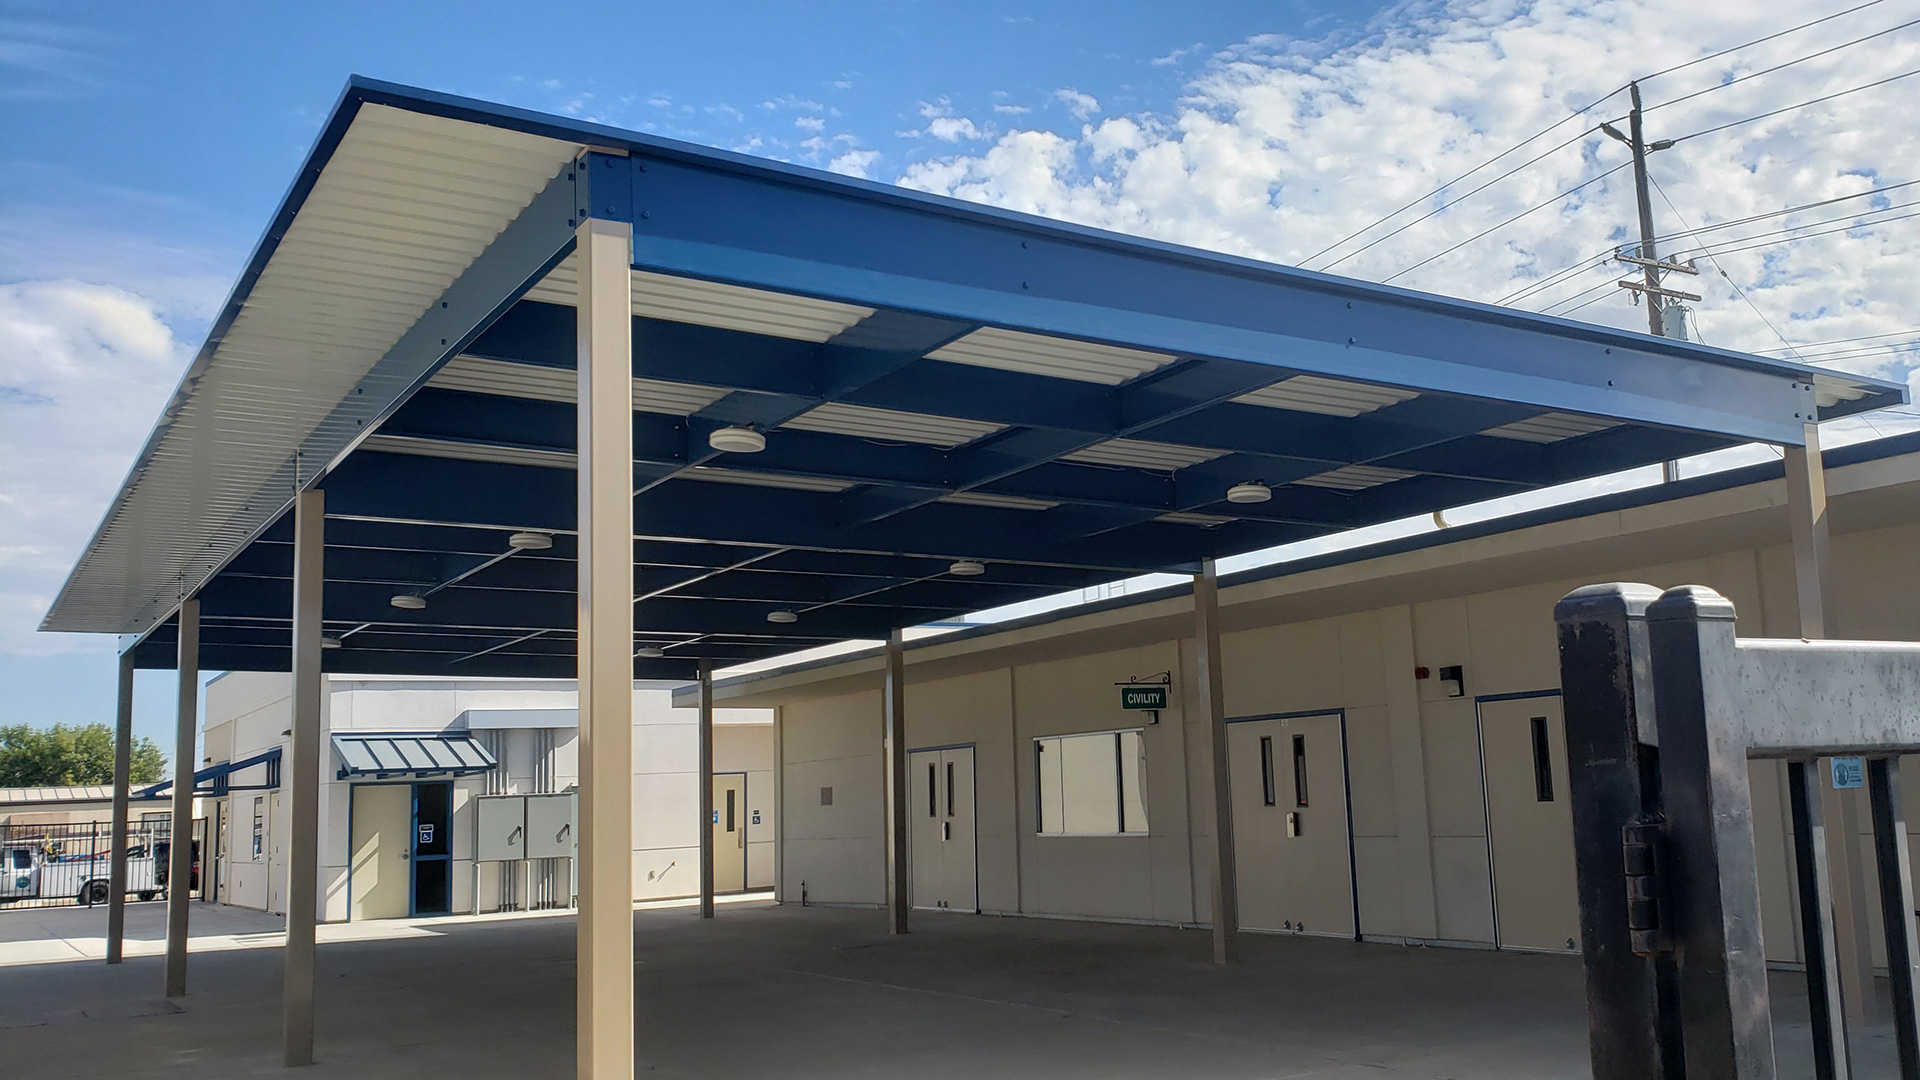 Large shade structure over concrete area between classrooms, with white posts and roof, and blue supports.